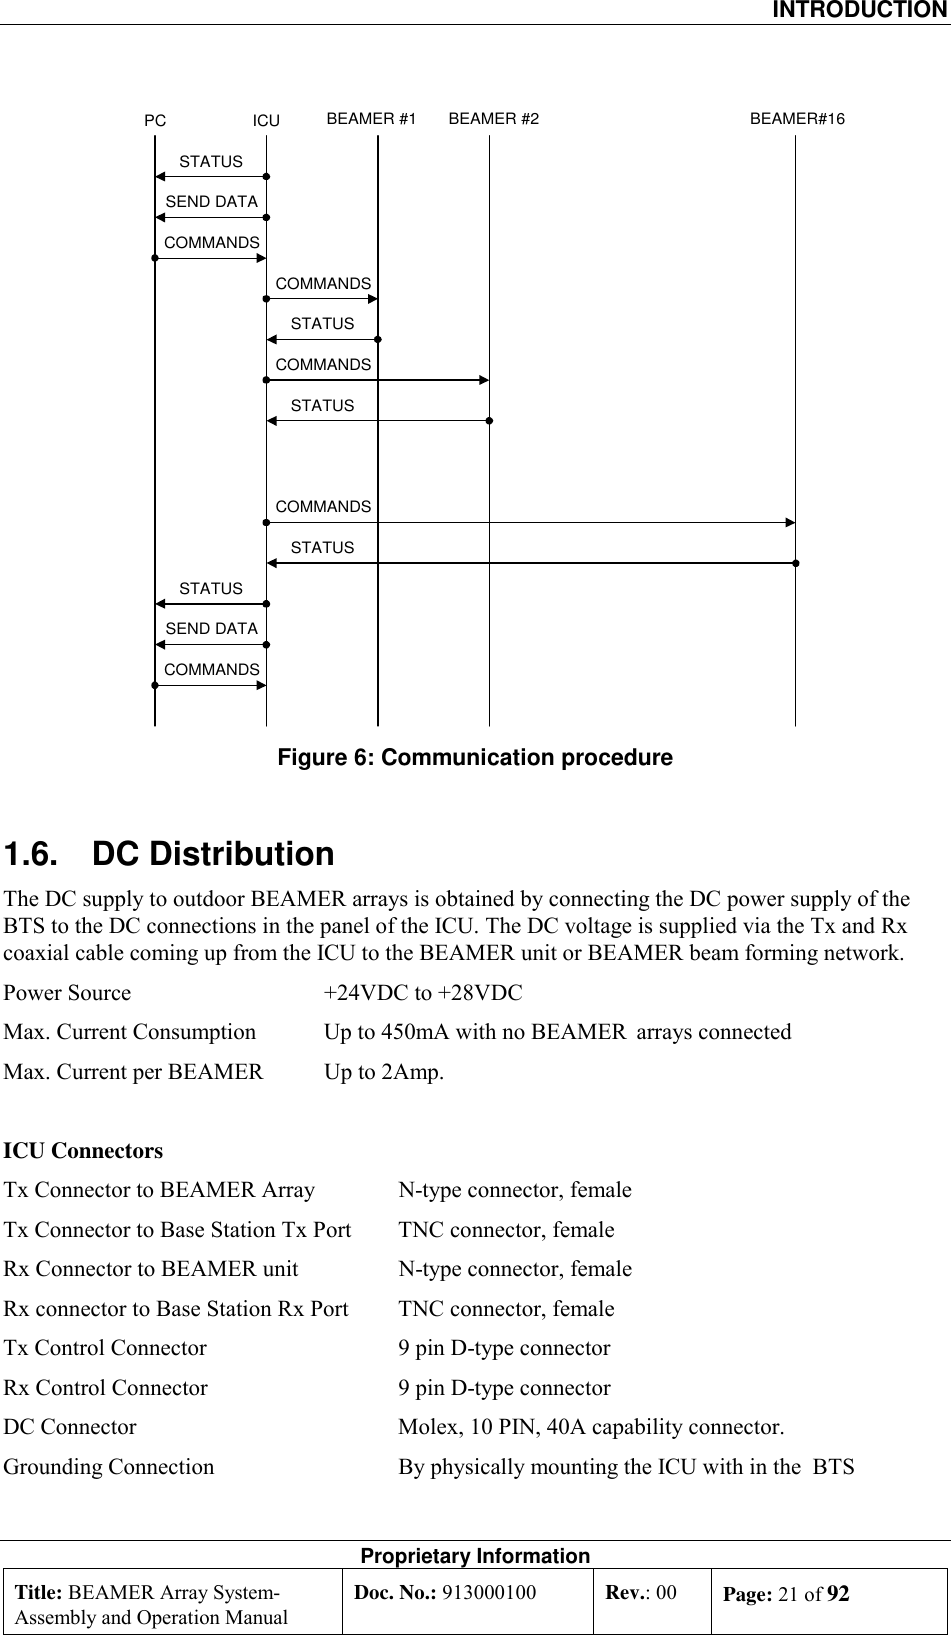  INTRODUCTION Proprietary Information Title: BEAMER Array System- Assembly and Operation Manual Doc. No.: 913000100  Rev.: 00  Page: 21 of 92  PC ICU BEAMER #1SEND DATACOMMANDSCOMMANDSSTATUSSTATUSSEND DATABEAMER #2 BEAMER#16COMMANDSSTATUSCOMMANDSSTATUSCOMMANDSSTATUS Figure 6: Communication procedure 1.6. DC Distribution The DC supply to outdoor BEAMER arrays is obtained by connecting the DC power supply of the BTS to the DC connections in the panel of the ICU. The DC voltage is supplied via the Tx and Rx coaxial cable coming up from the ICU to the BEAMER unit or BEAMER beam forming network.  Power Source  +24VDC to +28VDC  Max. Current Consumption  Up to 450mA with no BEAMER  arrays connected Max. Current per BEAMER   Up to 2Amp.  ICU Connectors Tx Connector to BEAMER Array   N-type connector, female Tx Connector to Base Station Tx Port   TNC connector, female Rx Connector to BEAMER unit   N-type connector, female Rx connector to Base Station Rx Port   TNC connector, female Tx Control Connector   9 pin D-type connector Rx Control Connector   9 pin D-type connector DC Connector   Molex, 10 PIN, 40A capability connector. Grounding Connection  By physically mounting the ICU with in the  BTS 